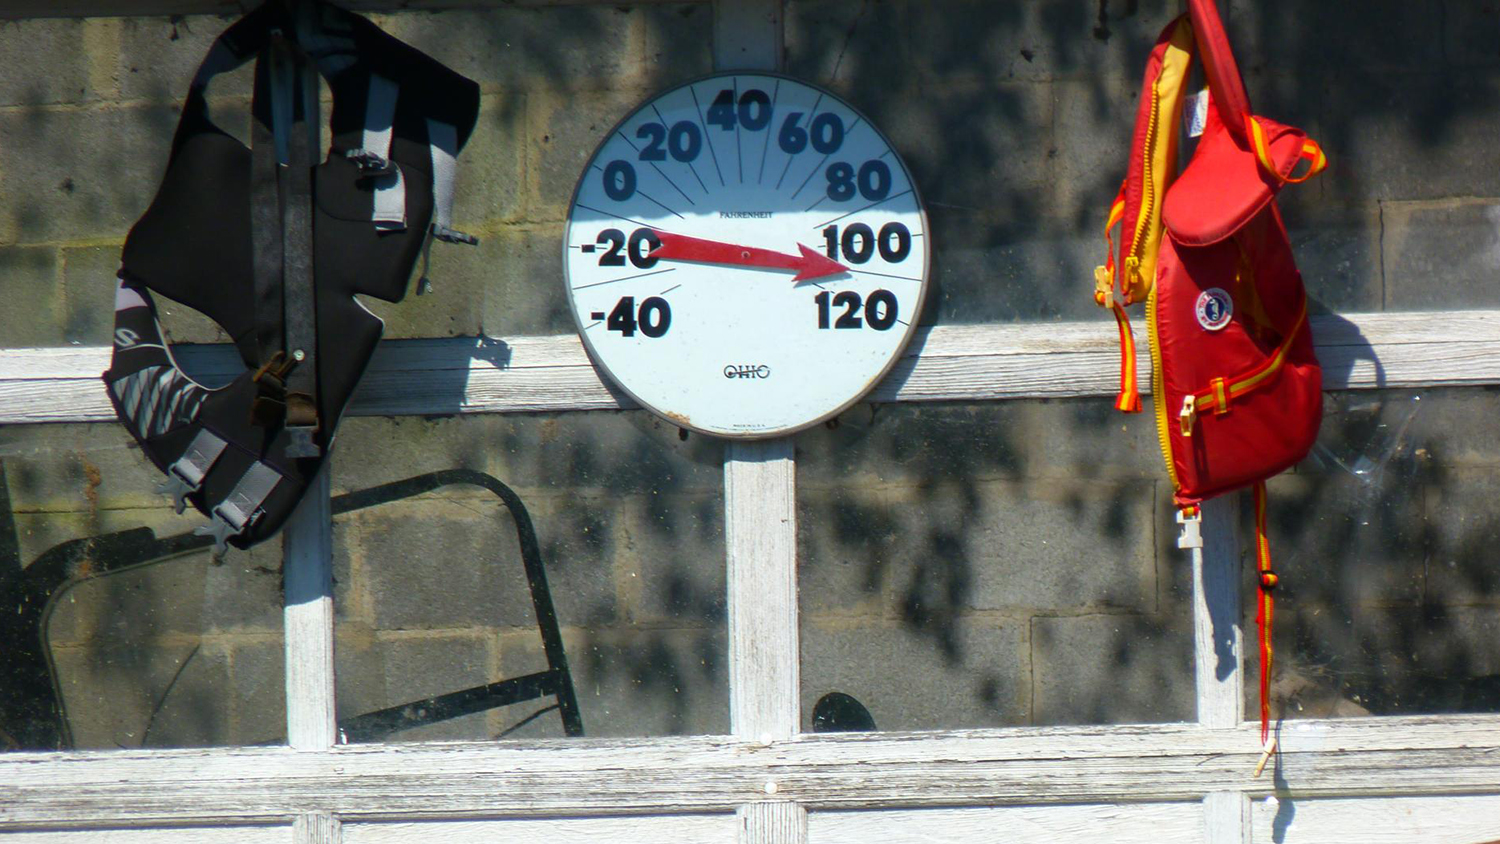 thermometer showing a temperature above 100 degrees fahrenheit